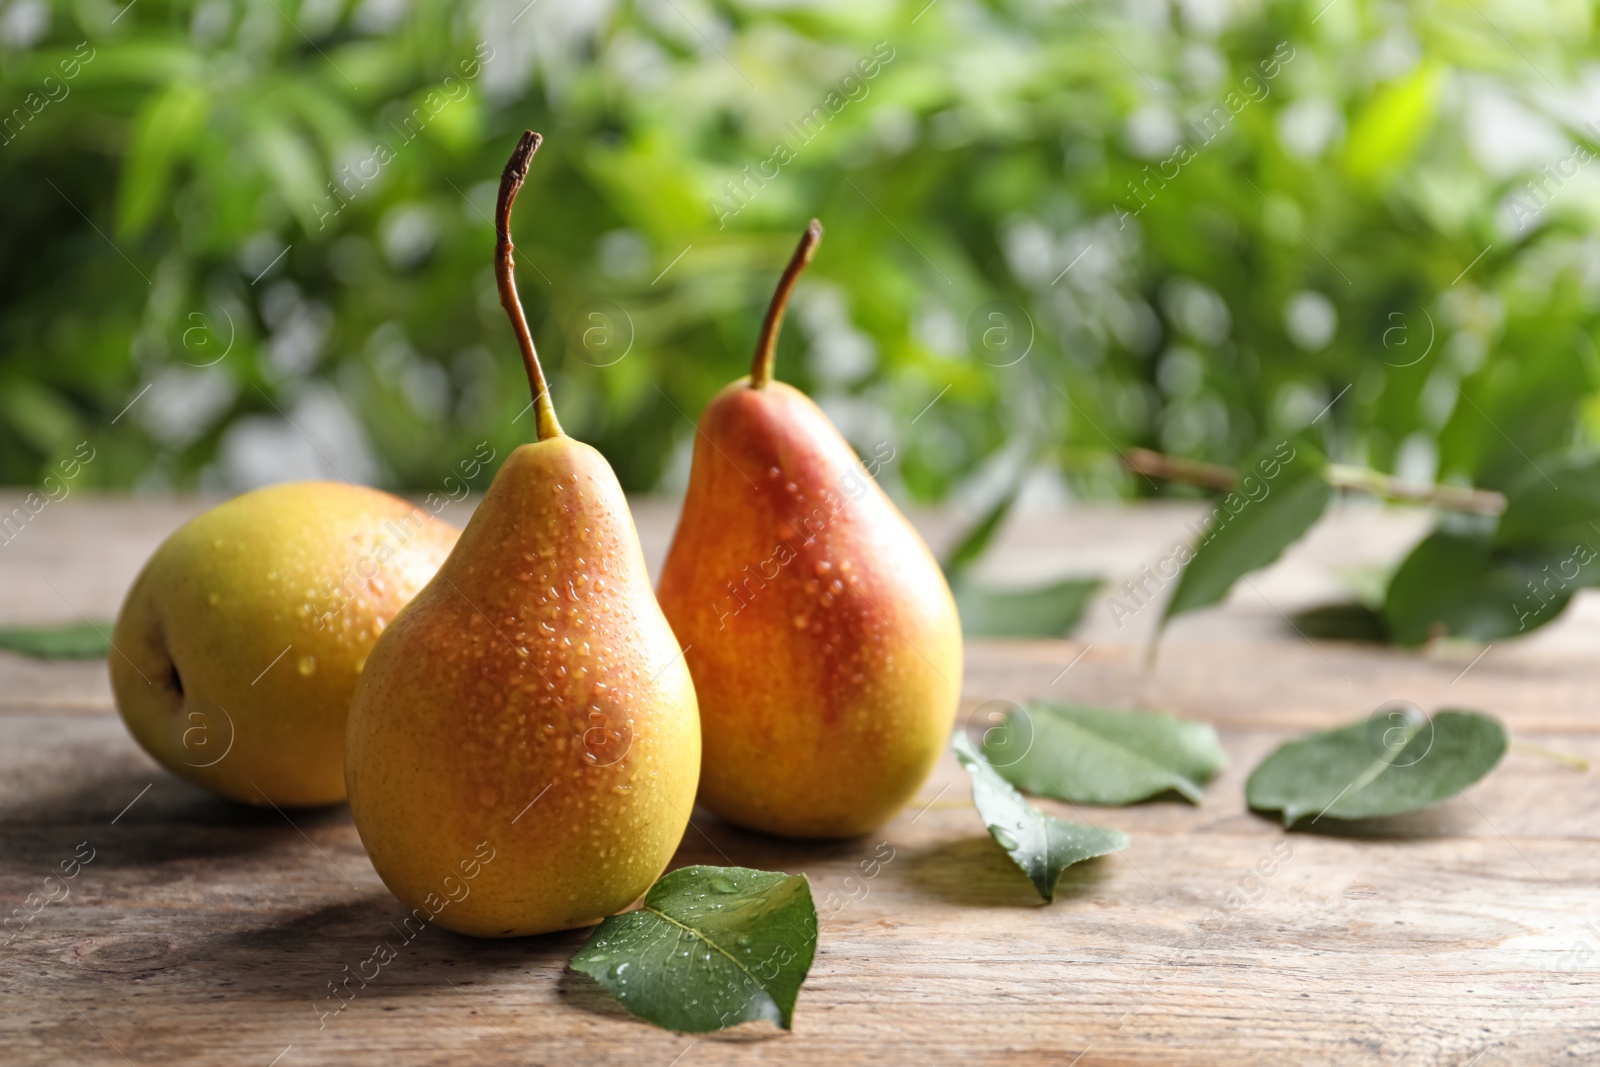 Photo of Ripe pears on wooden table against blurred background. Space for text